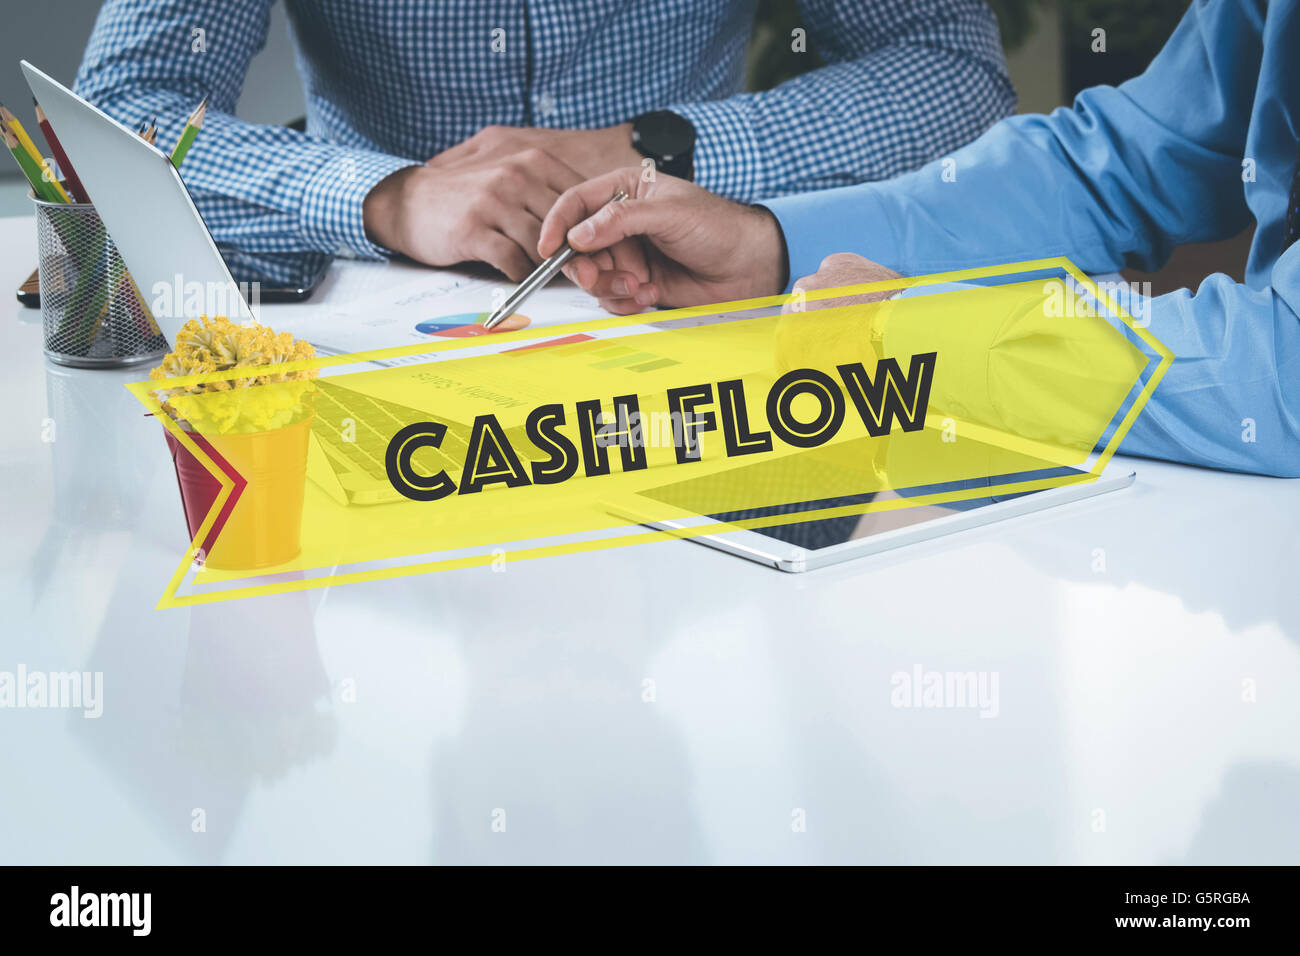 BUSINESS WORKING OFFICE Cash Flow TEAMWORK BRAINSTORMING CONCEPT Stock Photo